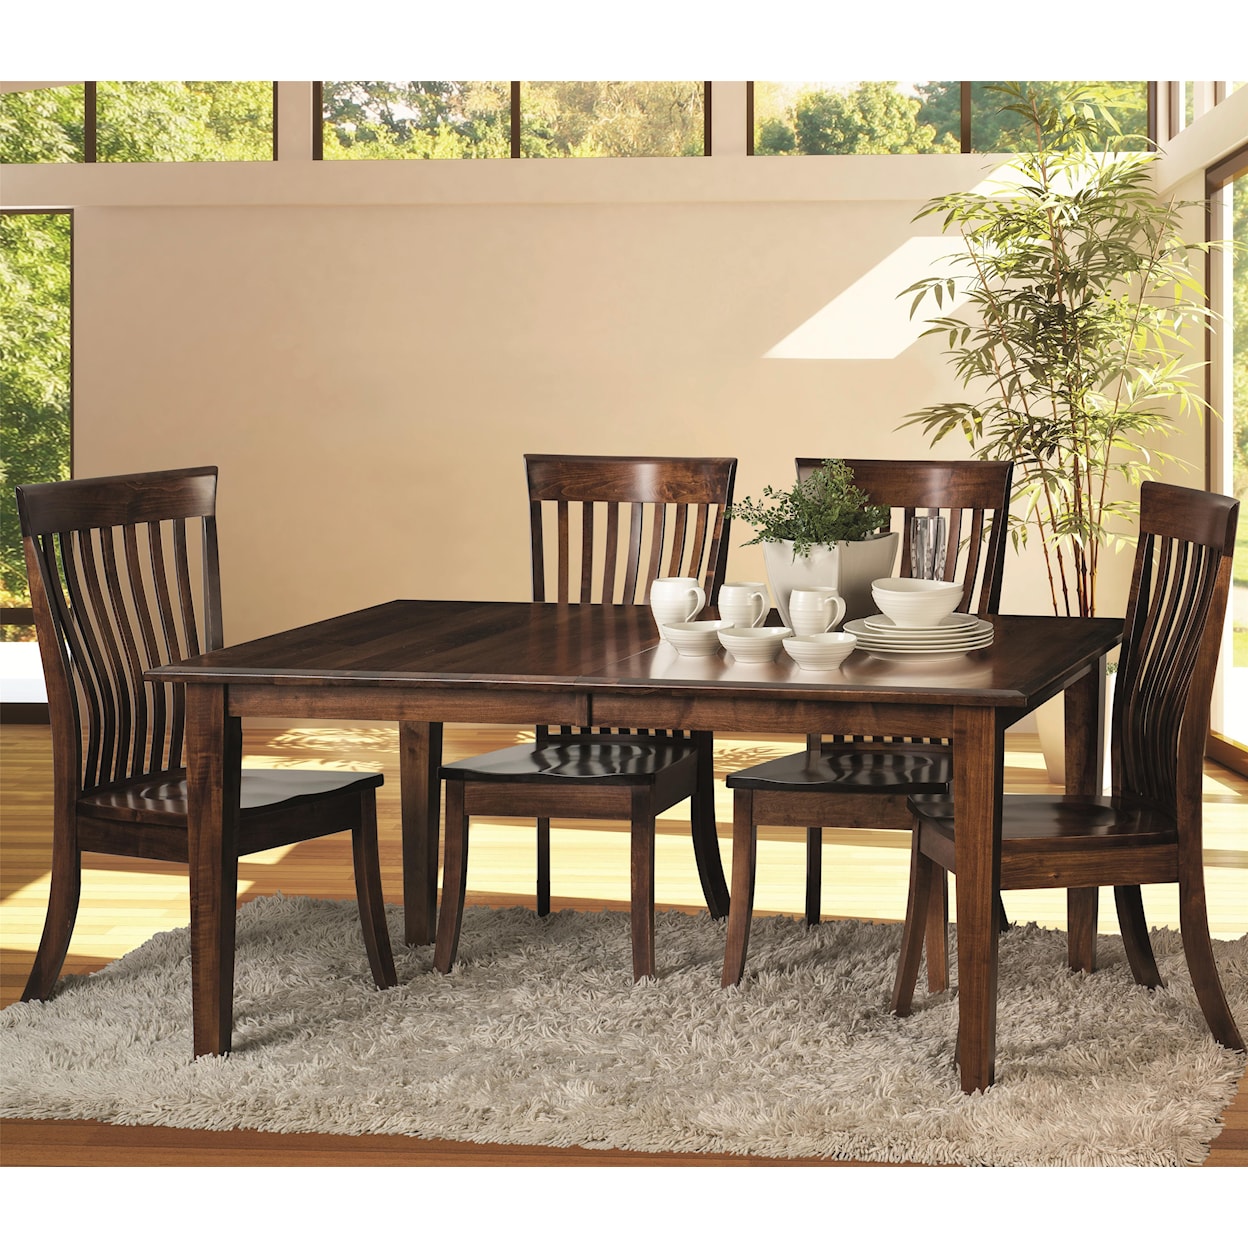 Amish Impressions by Fusion Designs Classic 5 Piece Dining Set